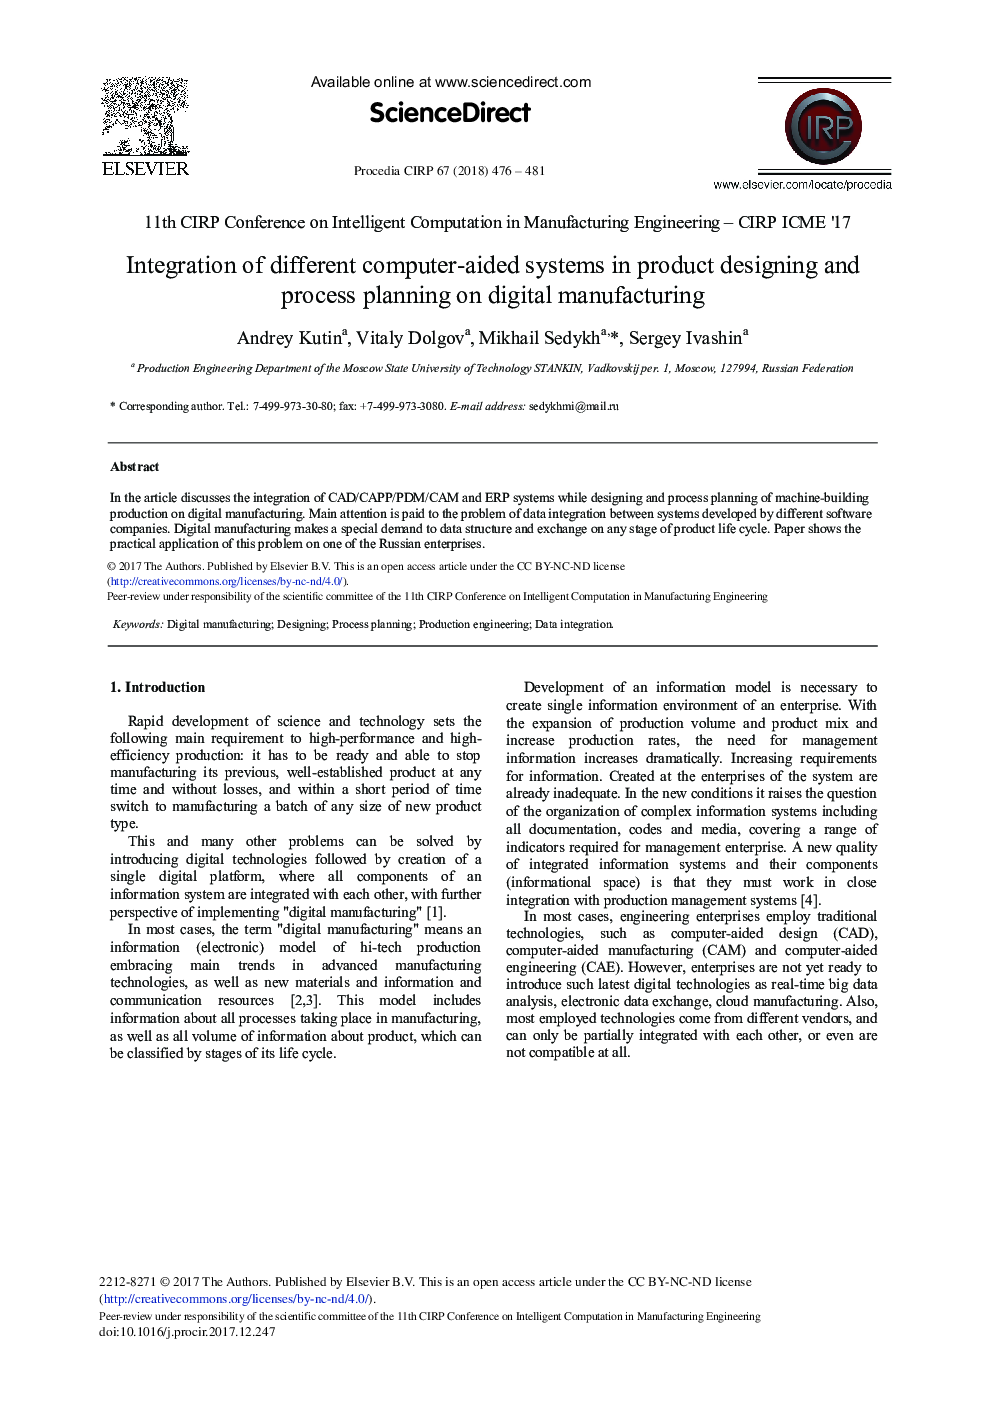 Integration of Different Computer-aided Systems in Product Designing and Process Planning on Digital Manufacturing